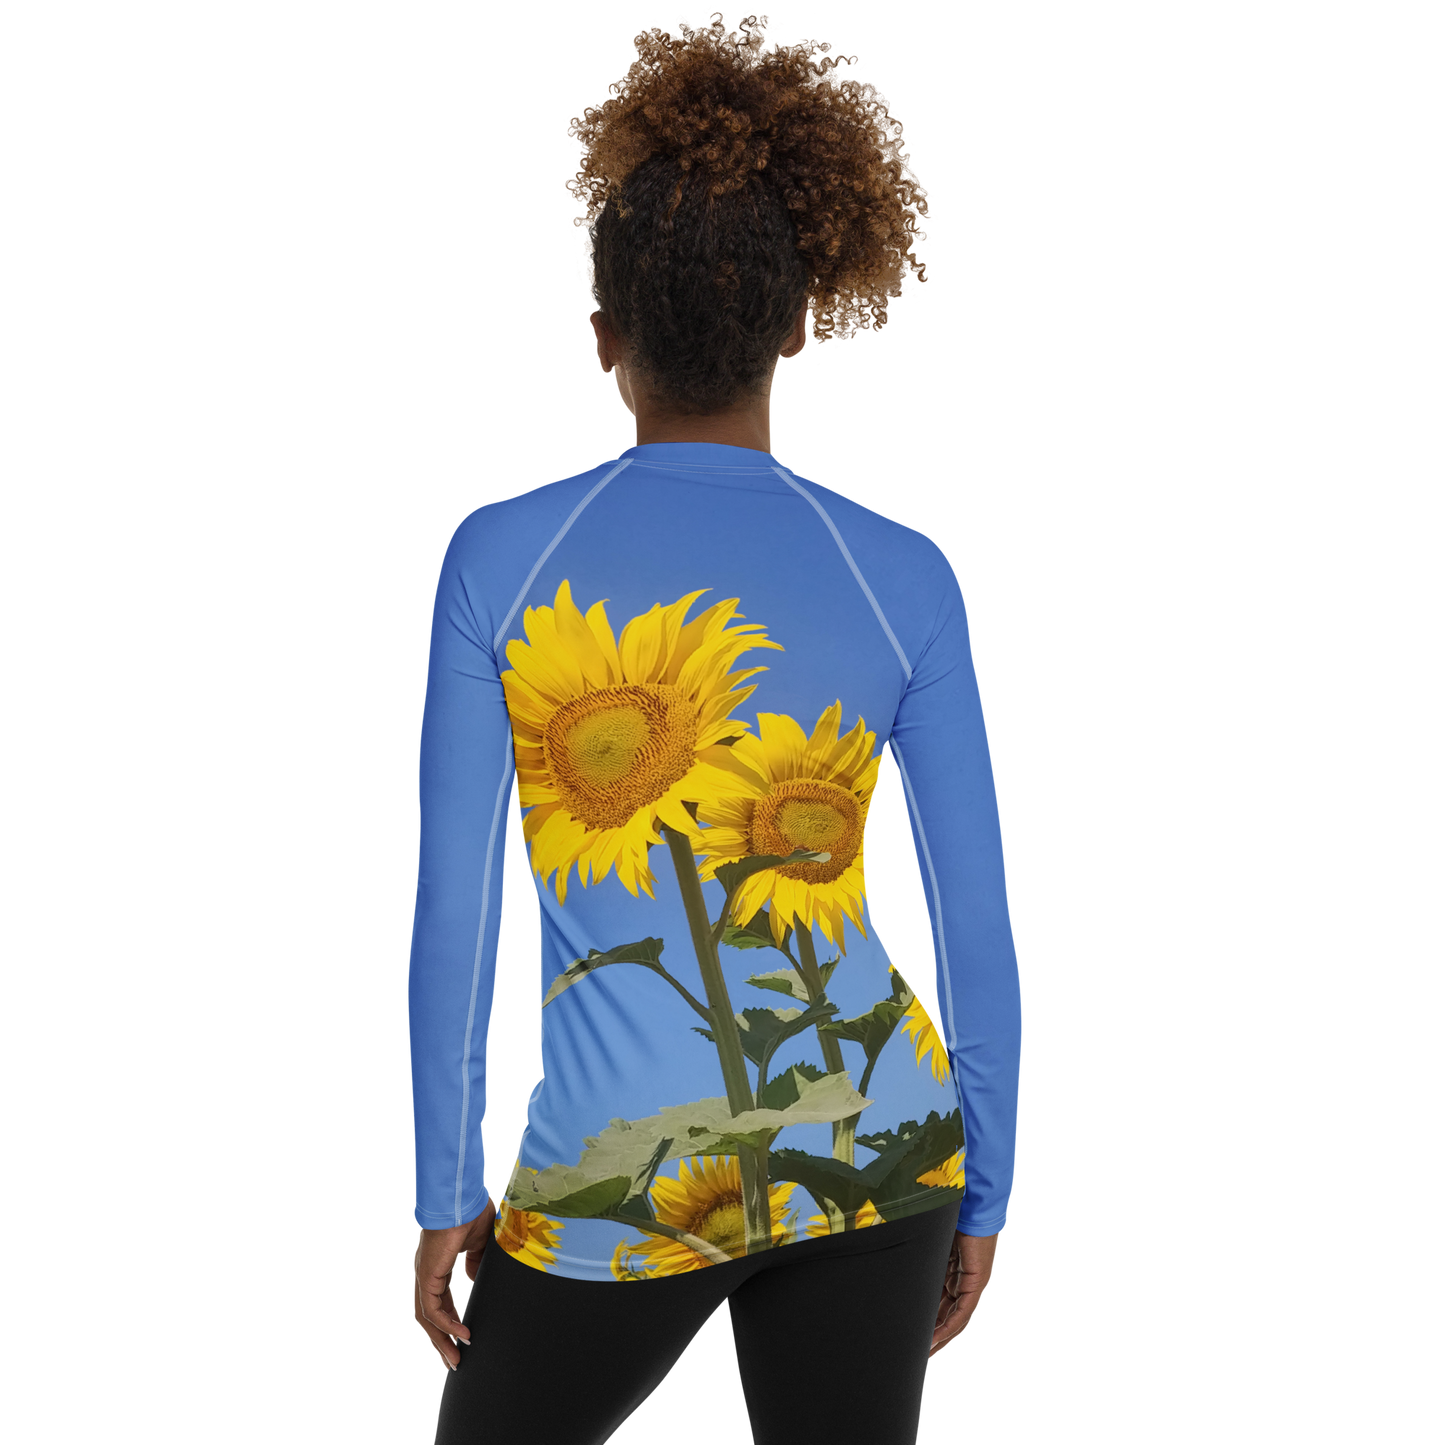 The FLOWER LOVE Collection - "Sunflower Sisters" Design Luxurious Women's Rash Guard, Sun Protective Clothing, Sports & Fitness Clothing